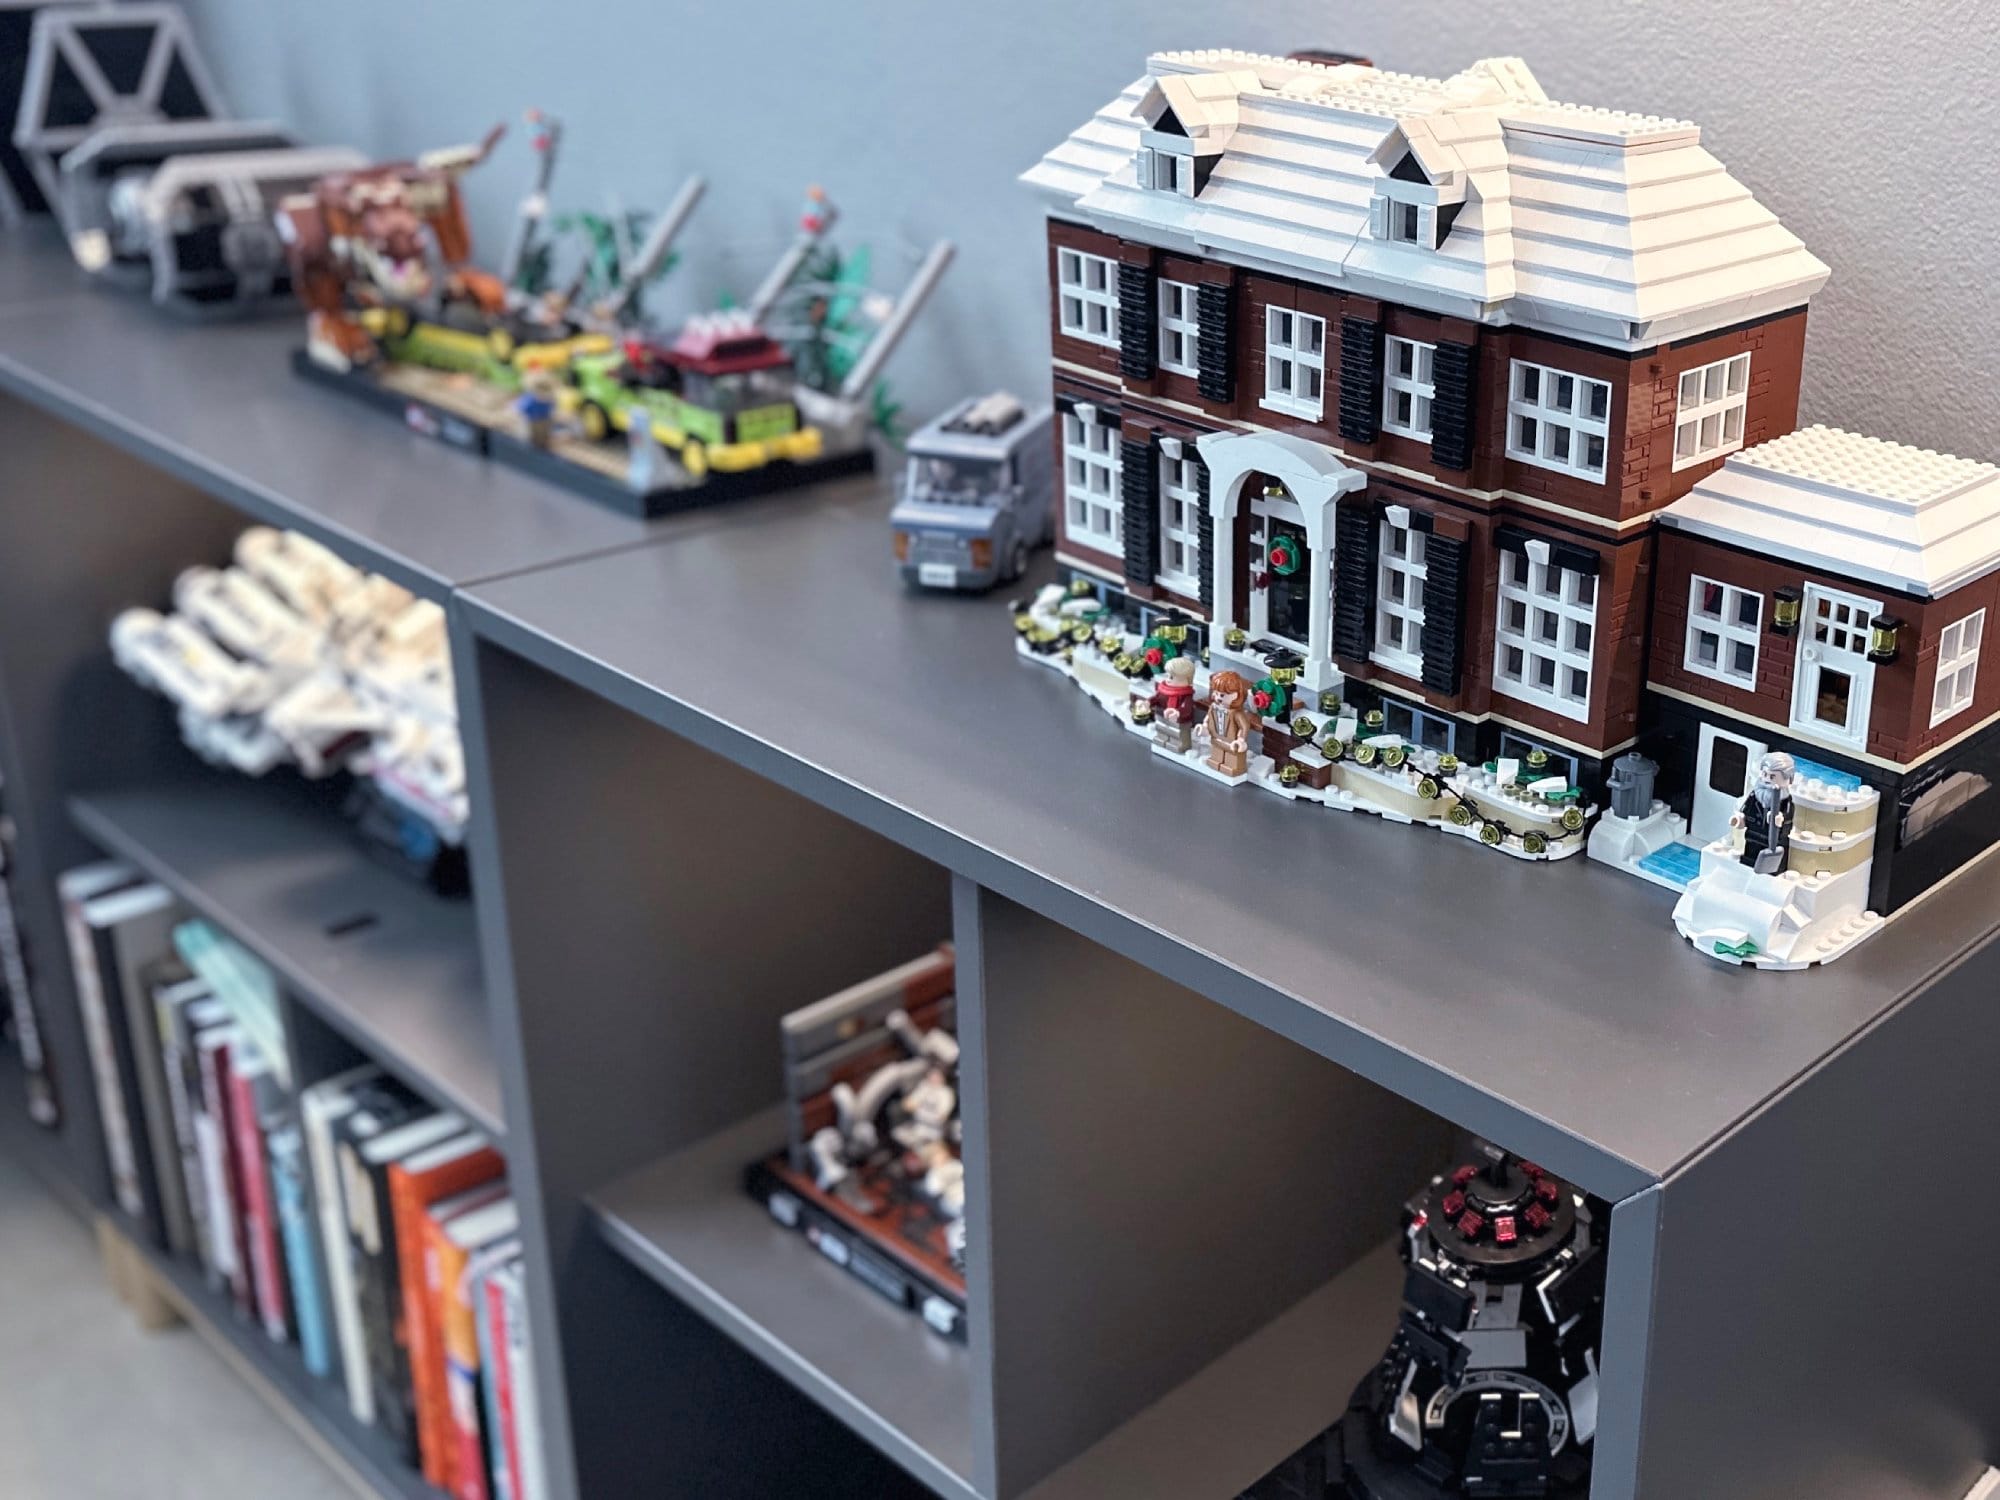 A shelf displaying a collection of intricate models, including a detailed brick-built house and various vehicles, with books stored on the lower shelf